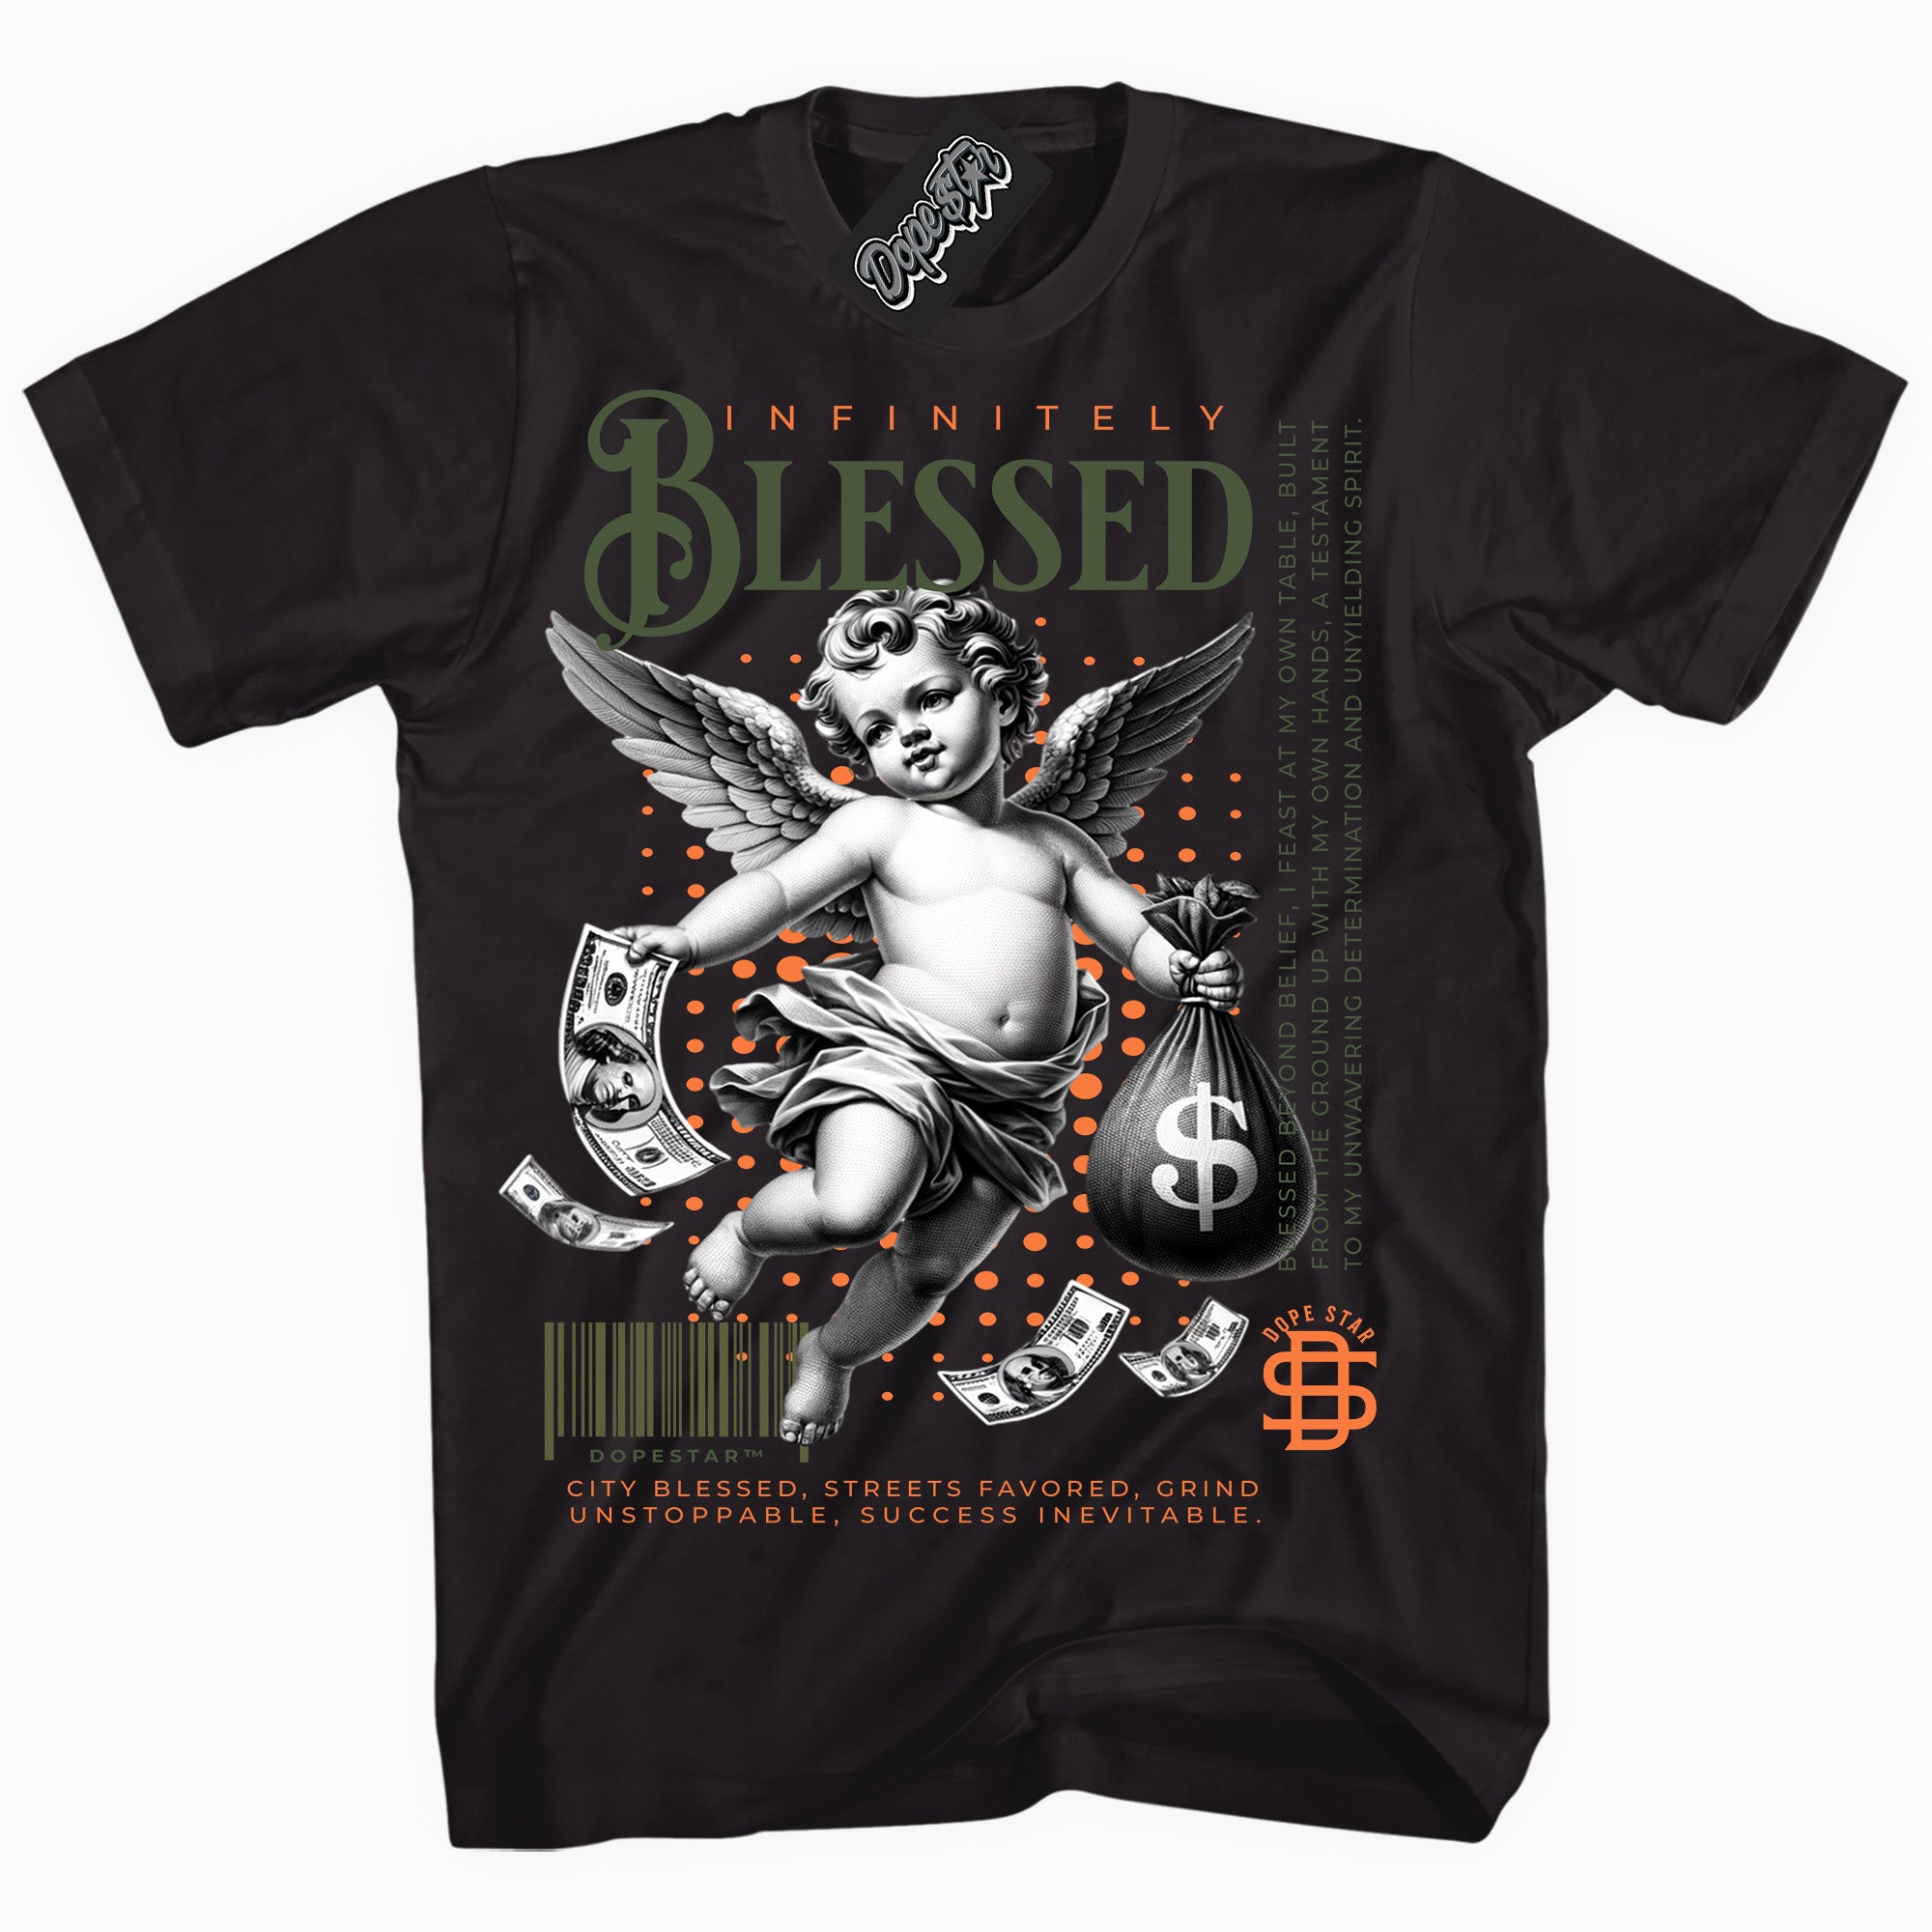 Cool Black graphic tee with “ Infinitely Blessed ” print, that perfectly matches Olive 5s sneakers